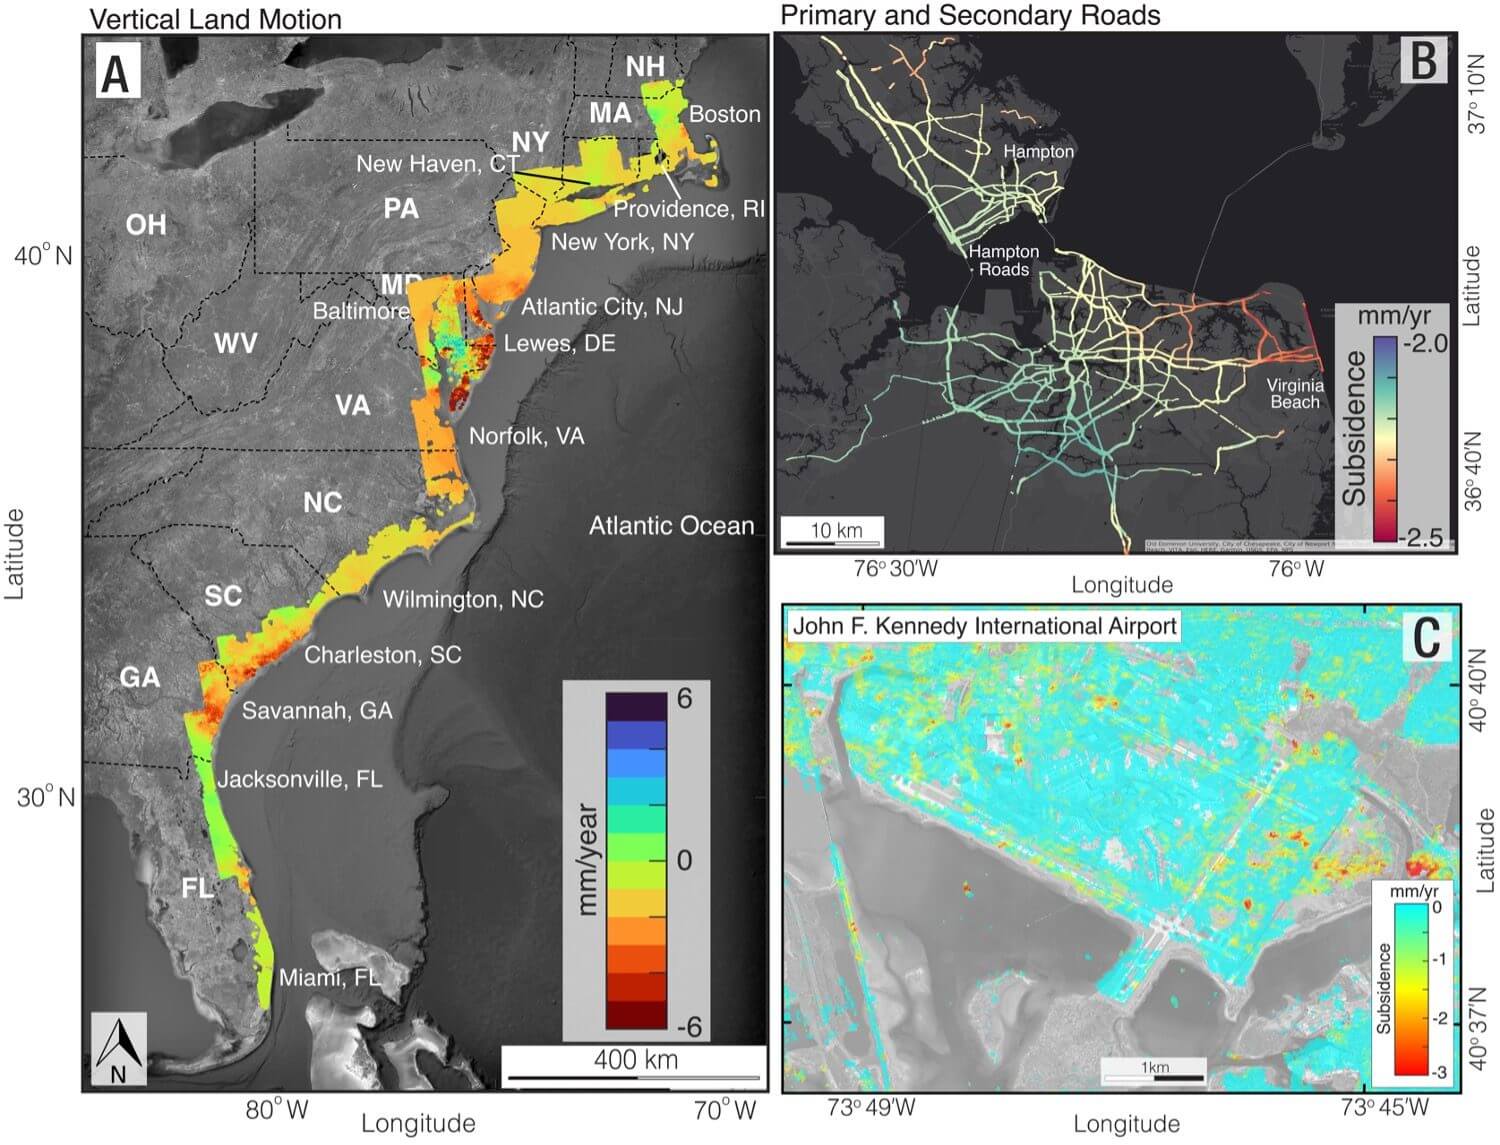 Graphic features: a spatial map of vertical land motion on the East Coast (left panel); primary, secondary, and interstate roads on Hampton Roads, Norfolk, and Virginia Beach, Virginia (top right panel); and John F. Kennedy International Airport, New York (bottom right panel). The yellow, orange and red areas on these maps denote areas of sinking. 